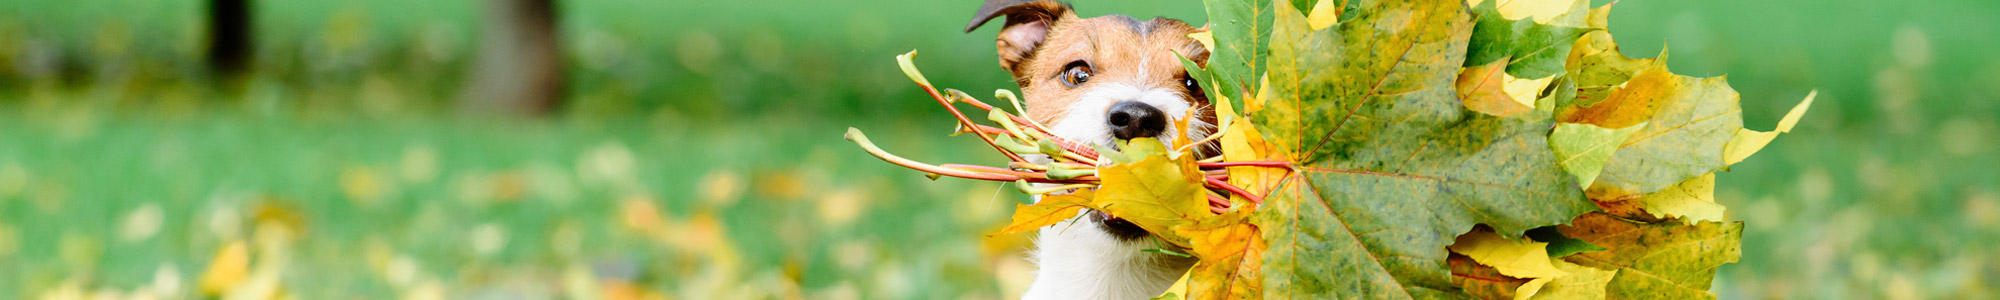 cute small dog with a mouth full of leaves he's collected